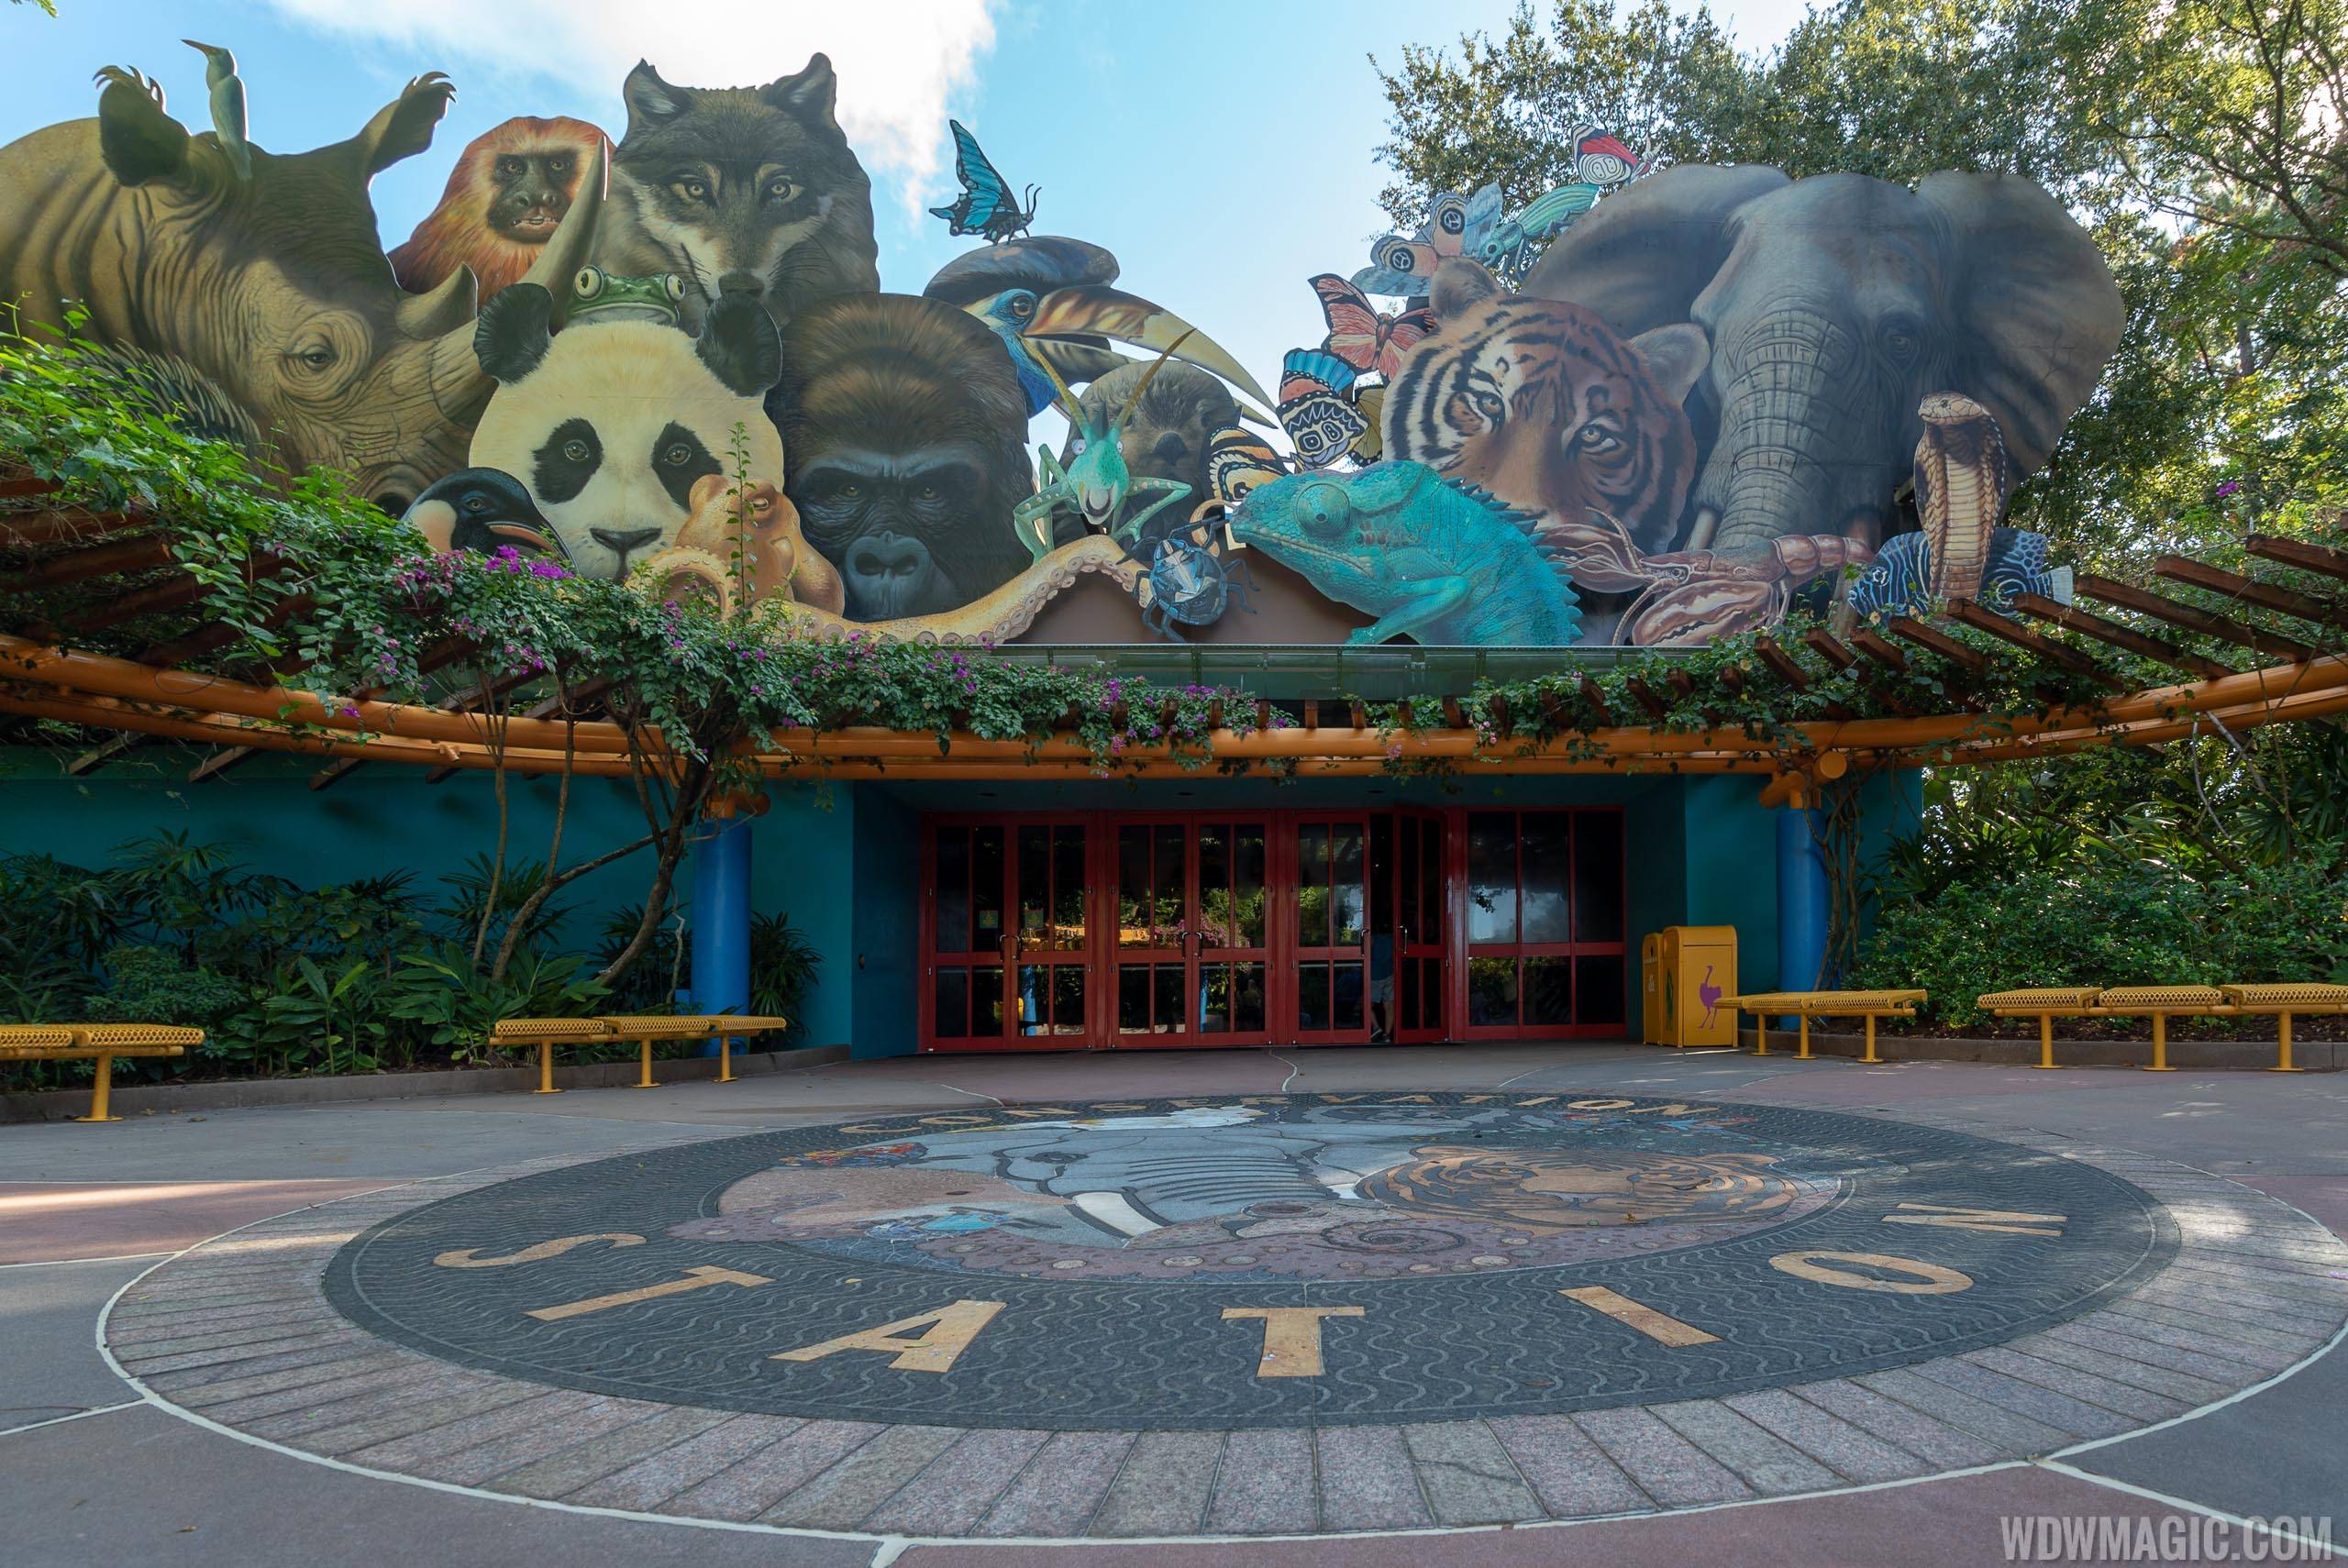 'Out of the Wild' is located at Rafiki's Planet Watch, just outside Conservation Station